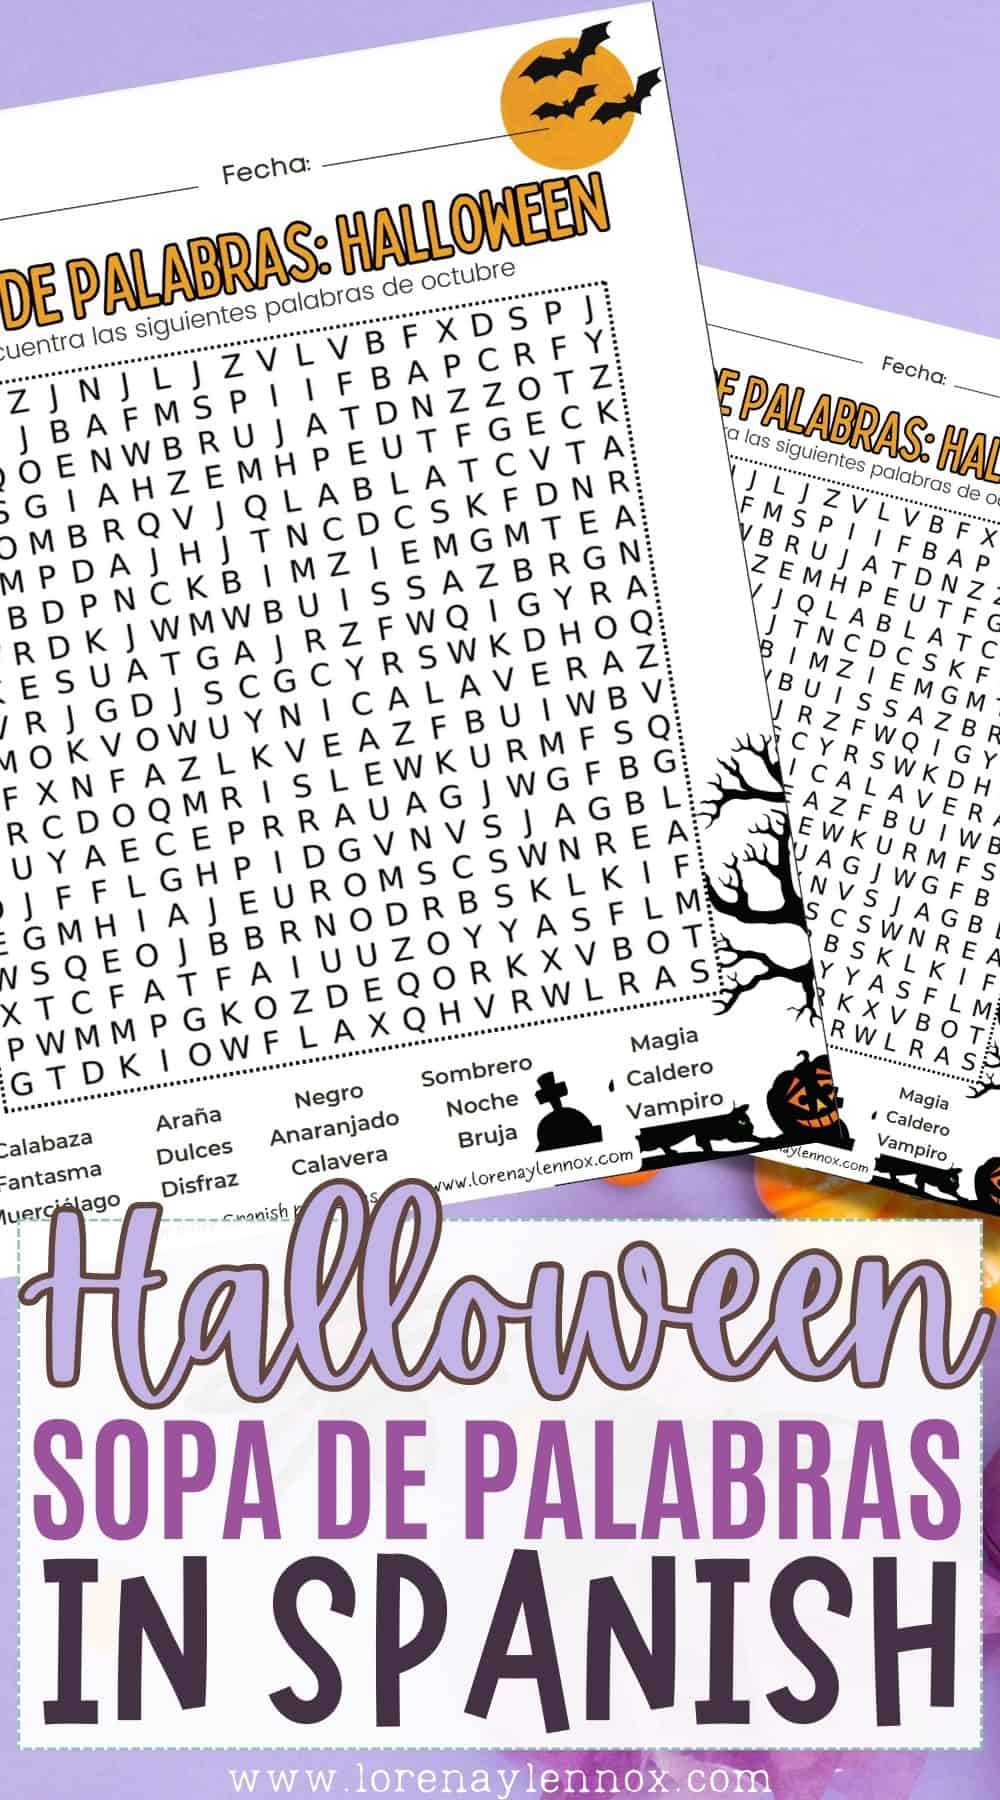 "Get ready for spook-tacular fun with our Free Printable Halloween Word Search in Spanish for Kids! 🎃👻 Engage young learners with this educational and entertaining activity that blends language learning with Halloween excitement. Download and enjoy a bewitching blend of education and play for the little ones! #HalloweenWordSearch #SpanishLearning #KidsActivities #EducationalFun #HalloweenPrintables #LanguageLearning #SpookySeason #BilingualEducation #HalloweenExcitement #LearningThroughPlay"